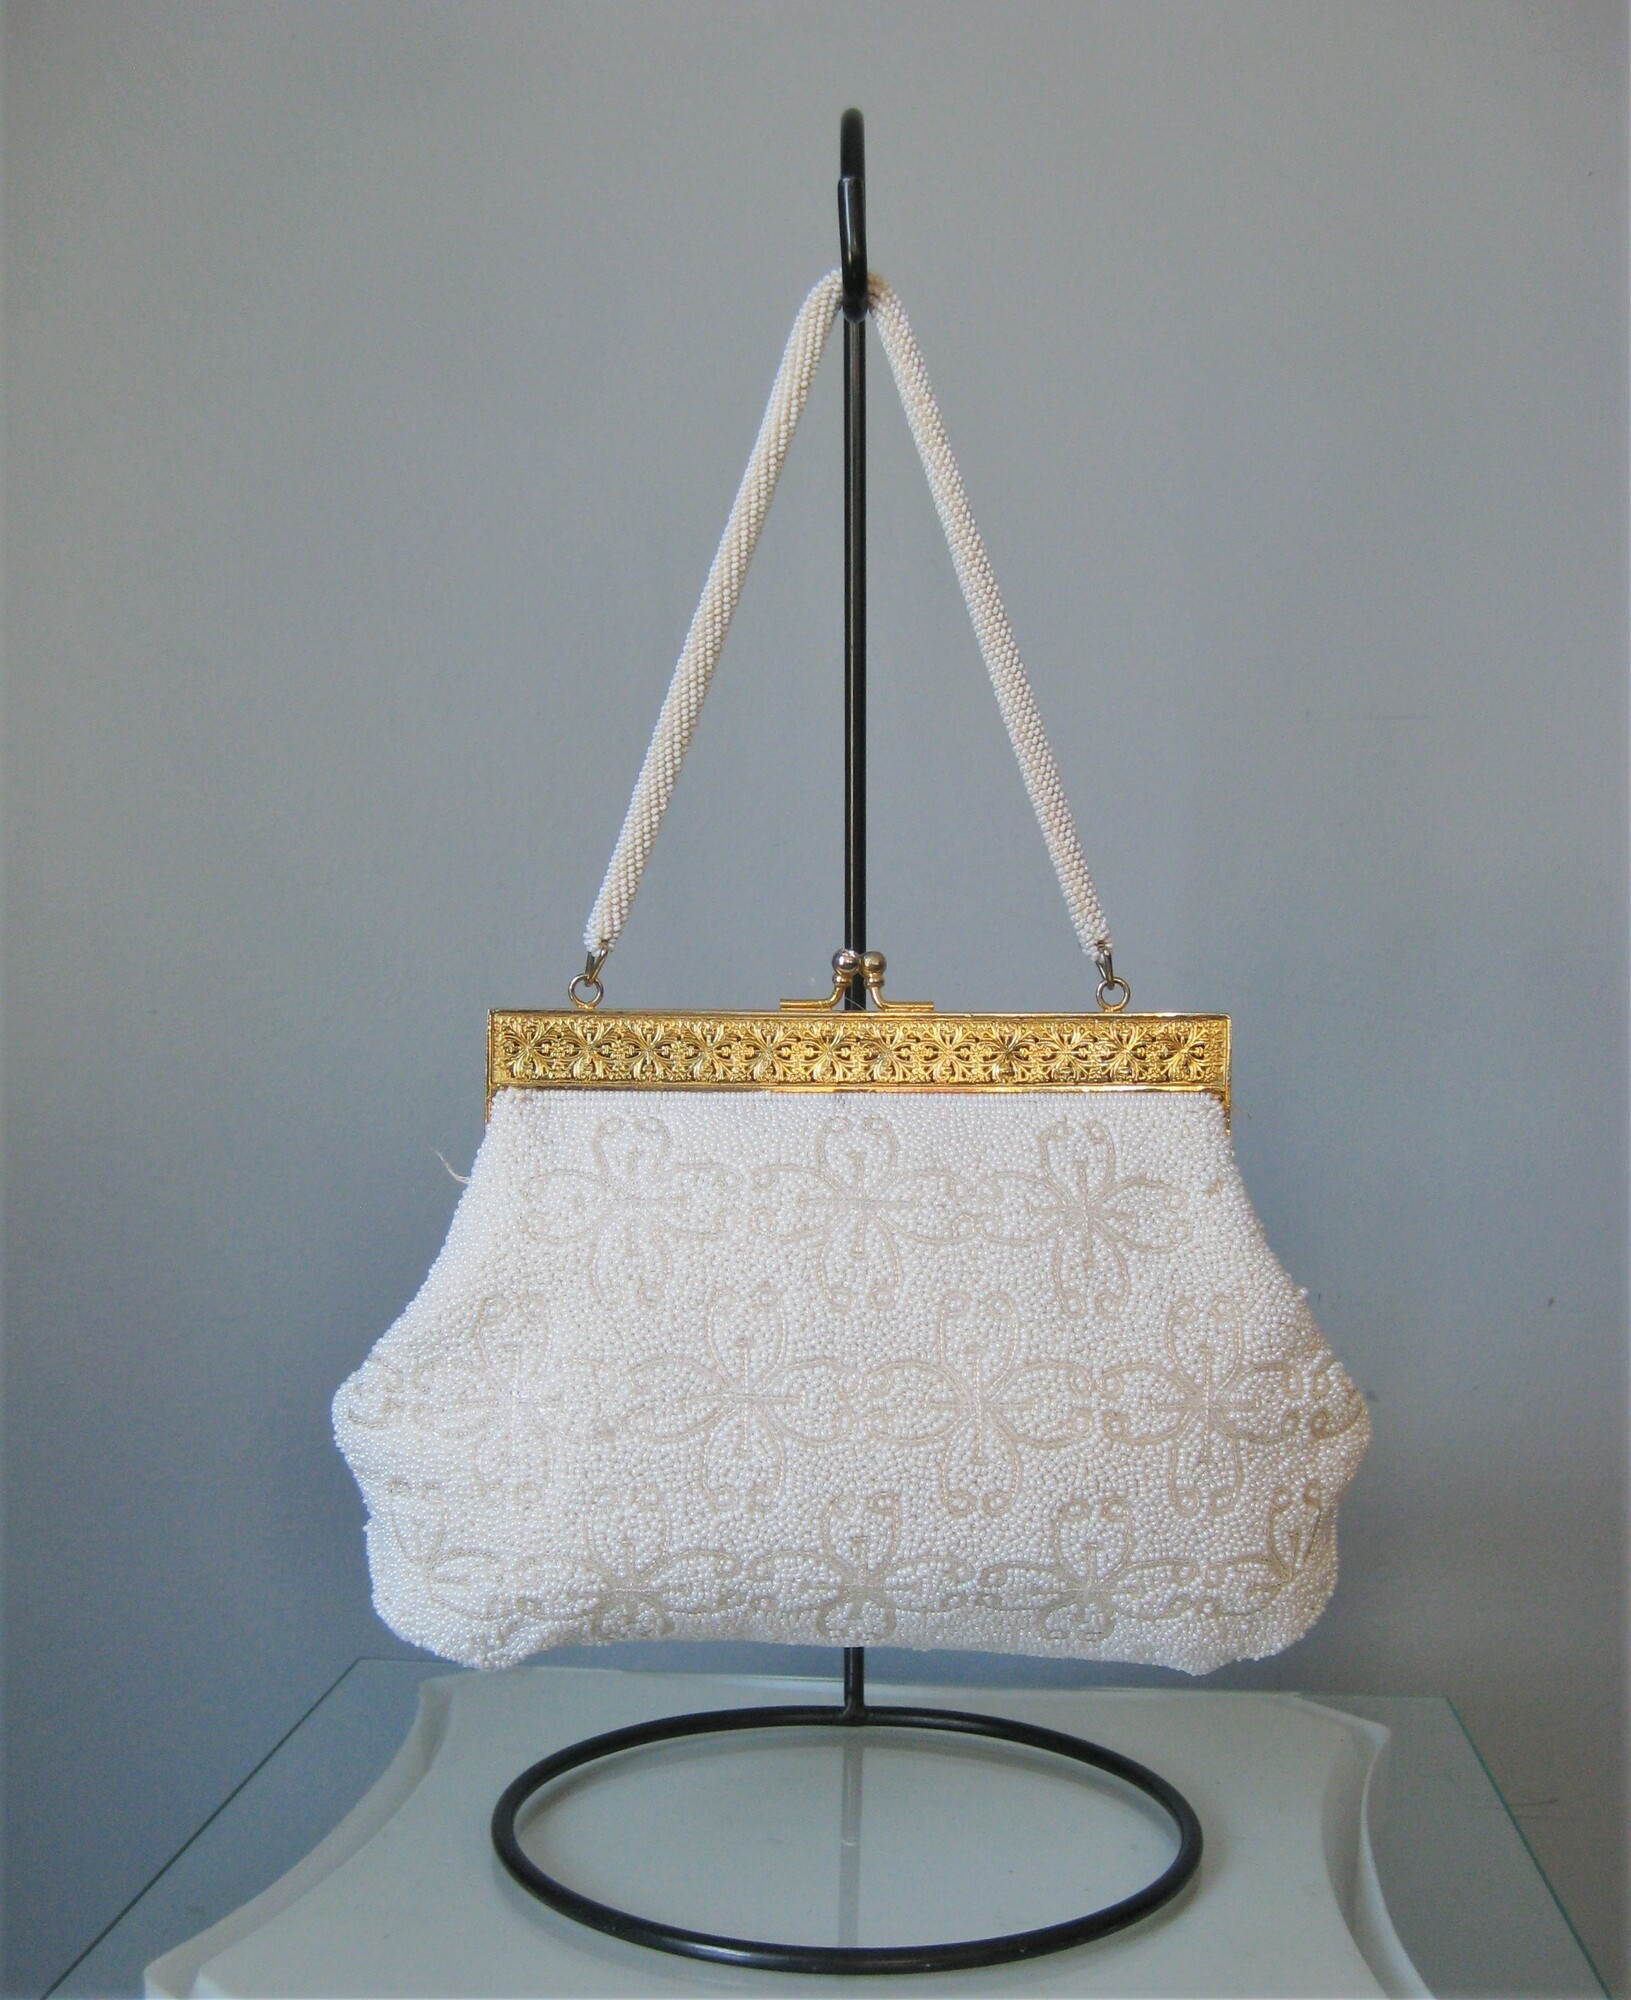 White beaded Frame bag from the 1960s.
high quality gold metal frame with modeled relief and jeweled tilt clasp.
the frame opens wide which is really usefull.  Roomy interior lined with white satin with a few slip pockets.
Single beaded handle.
Made in British Hong Kong by Grande Maison Blanche

Great condition, with some brownness on a few beads on one side and some rust stains on the inside.

Width 7
Height: 6.75
Depth: 1.5
Handle Drop: 5.75
thank you for looking!
#43958